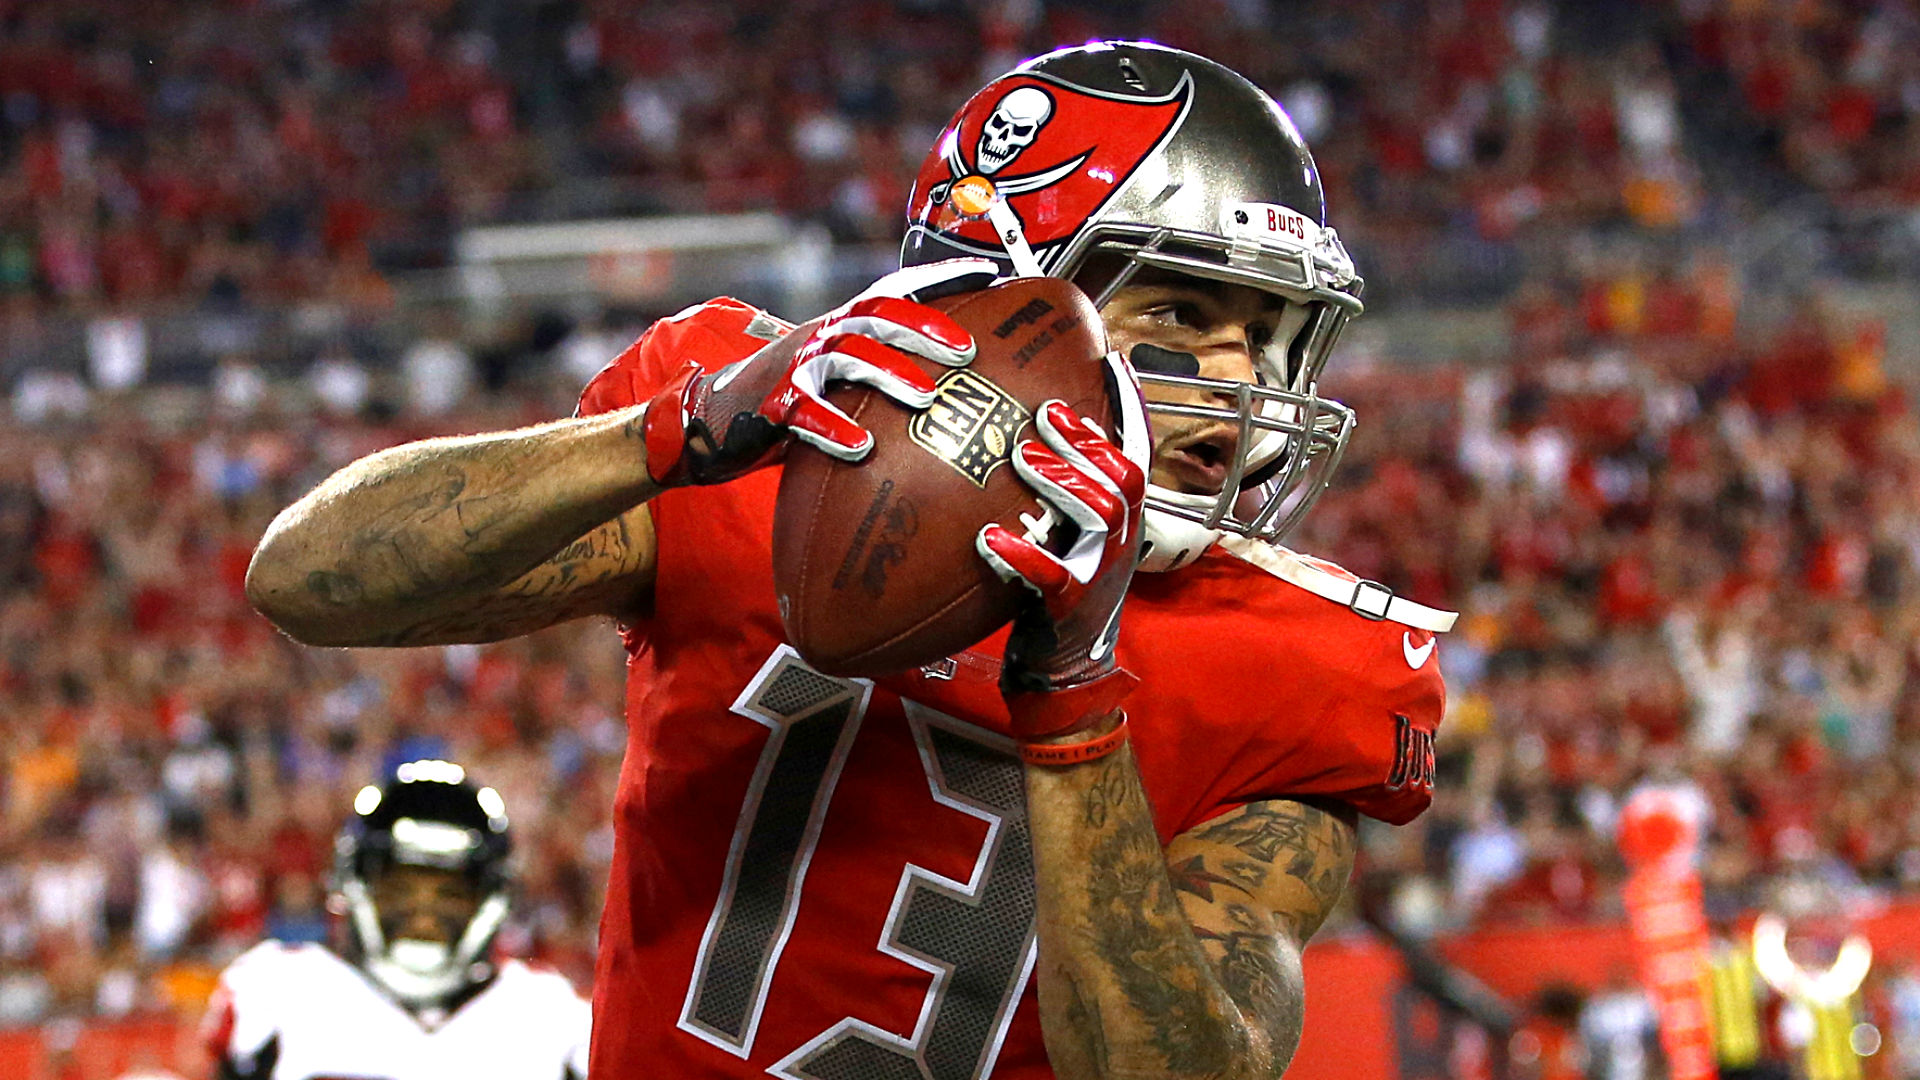 Watch: Bucs WR Mike Evans pays dearly for circus catch | NFL | Sporting News